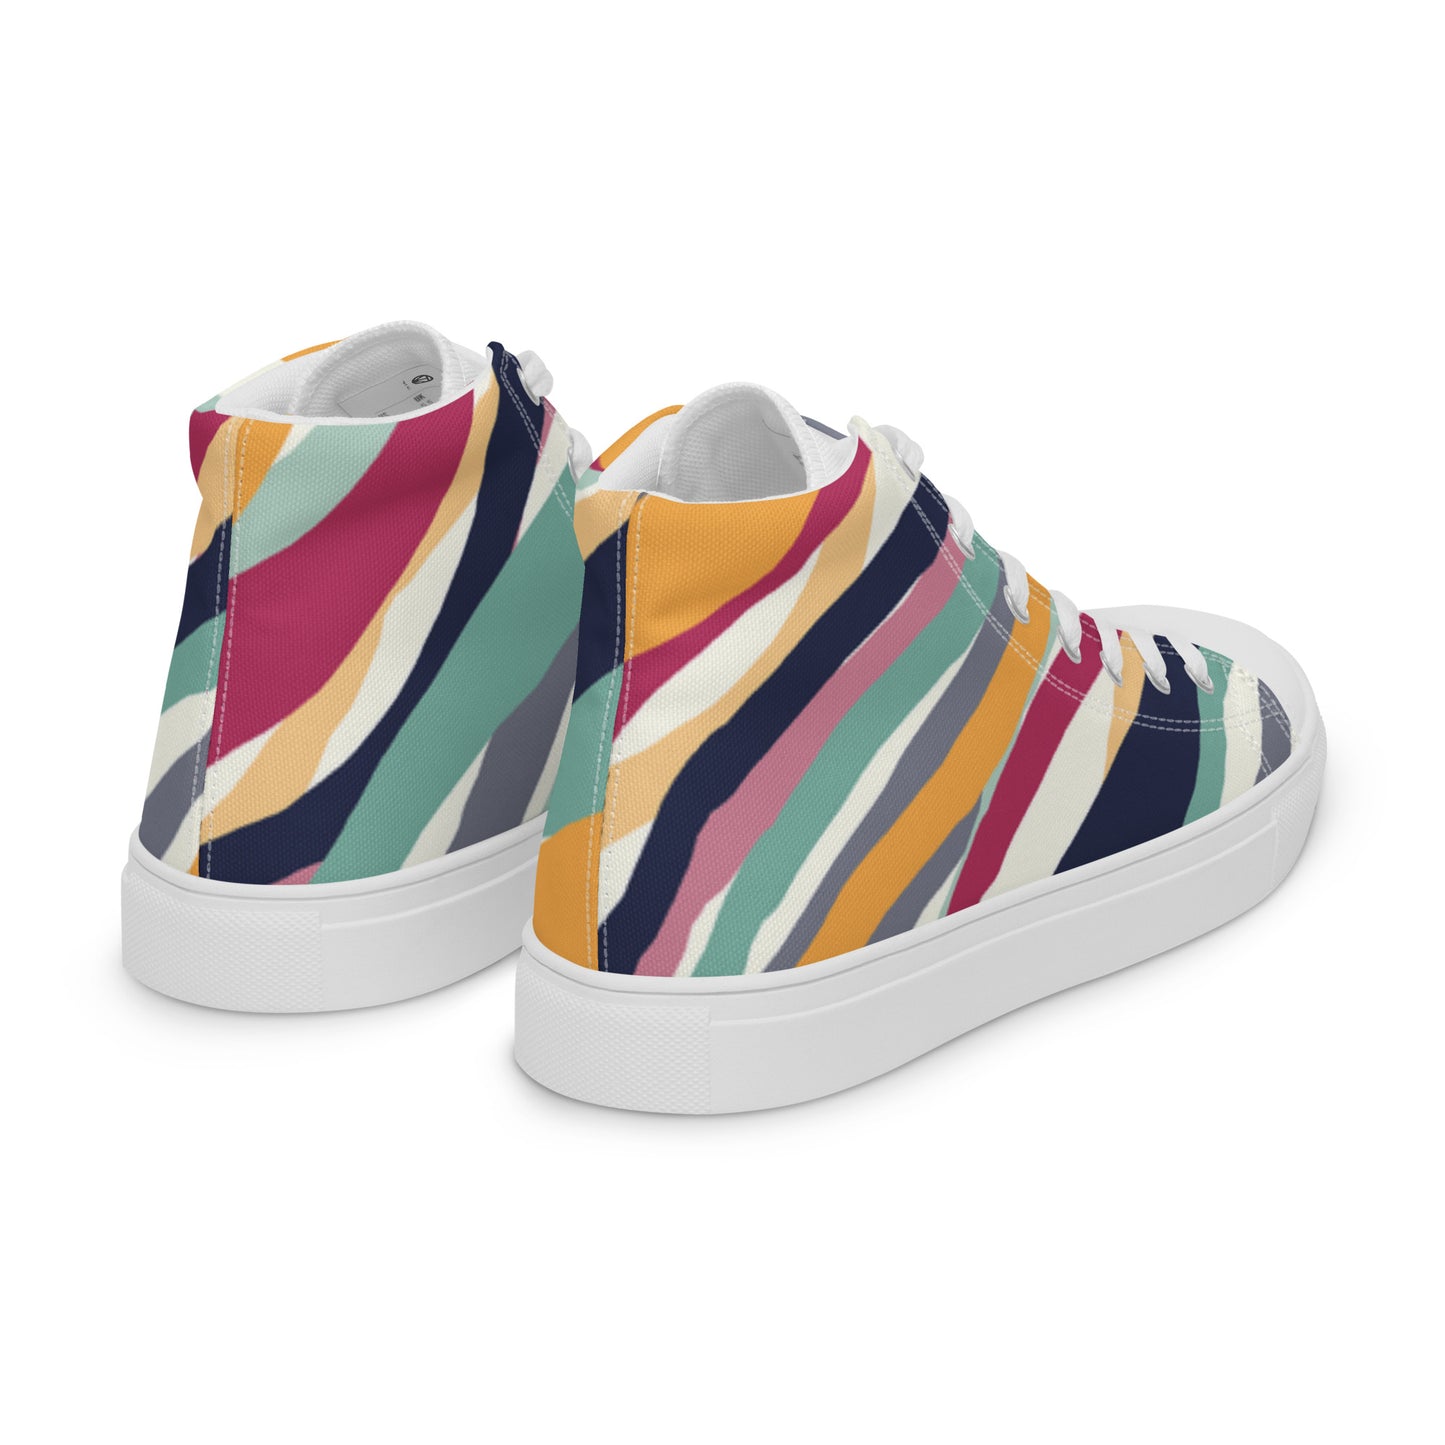 TIME OF VIBES Women’s High Sneaker COLOR